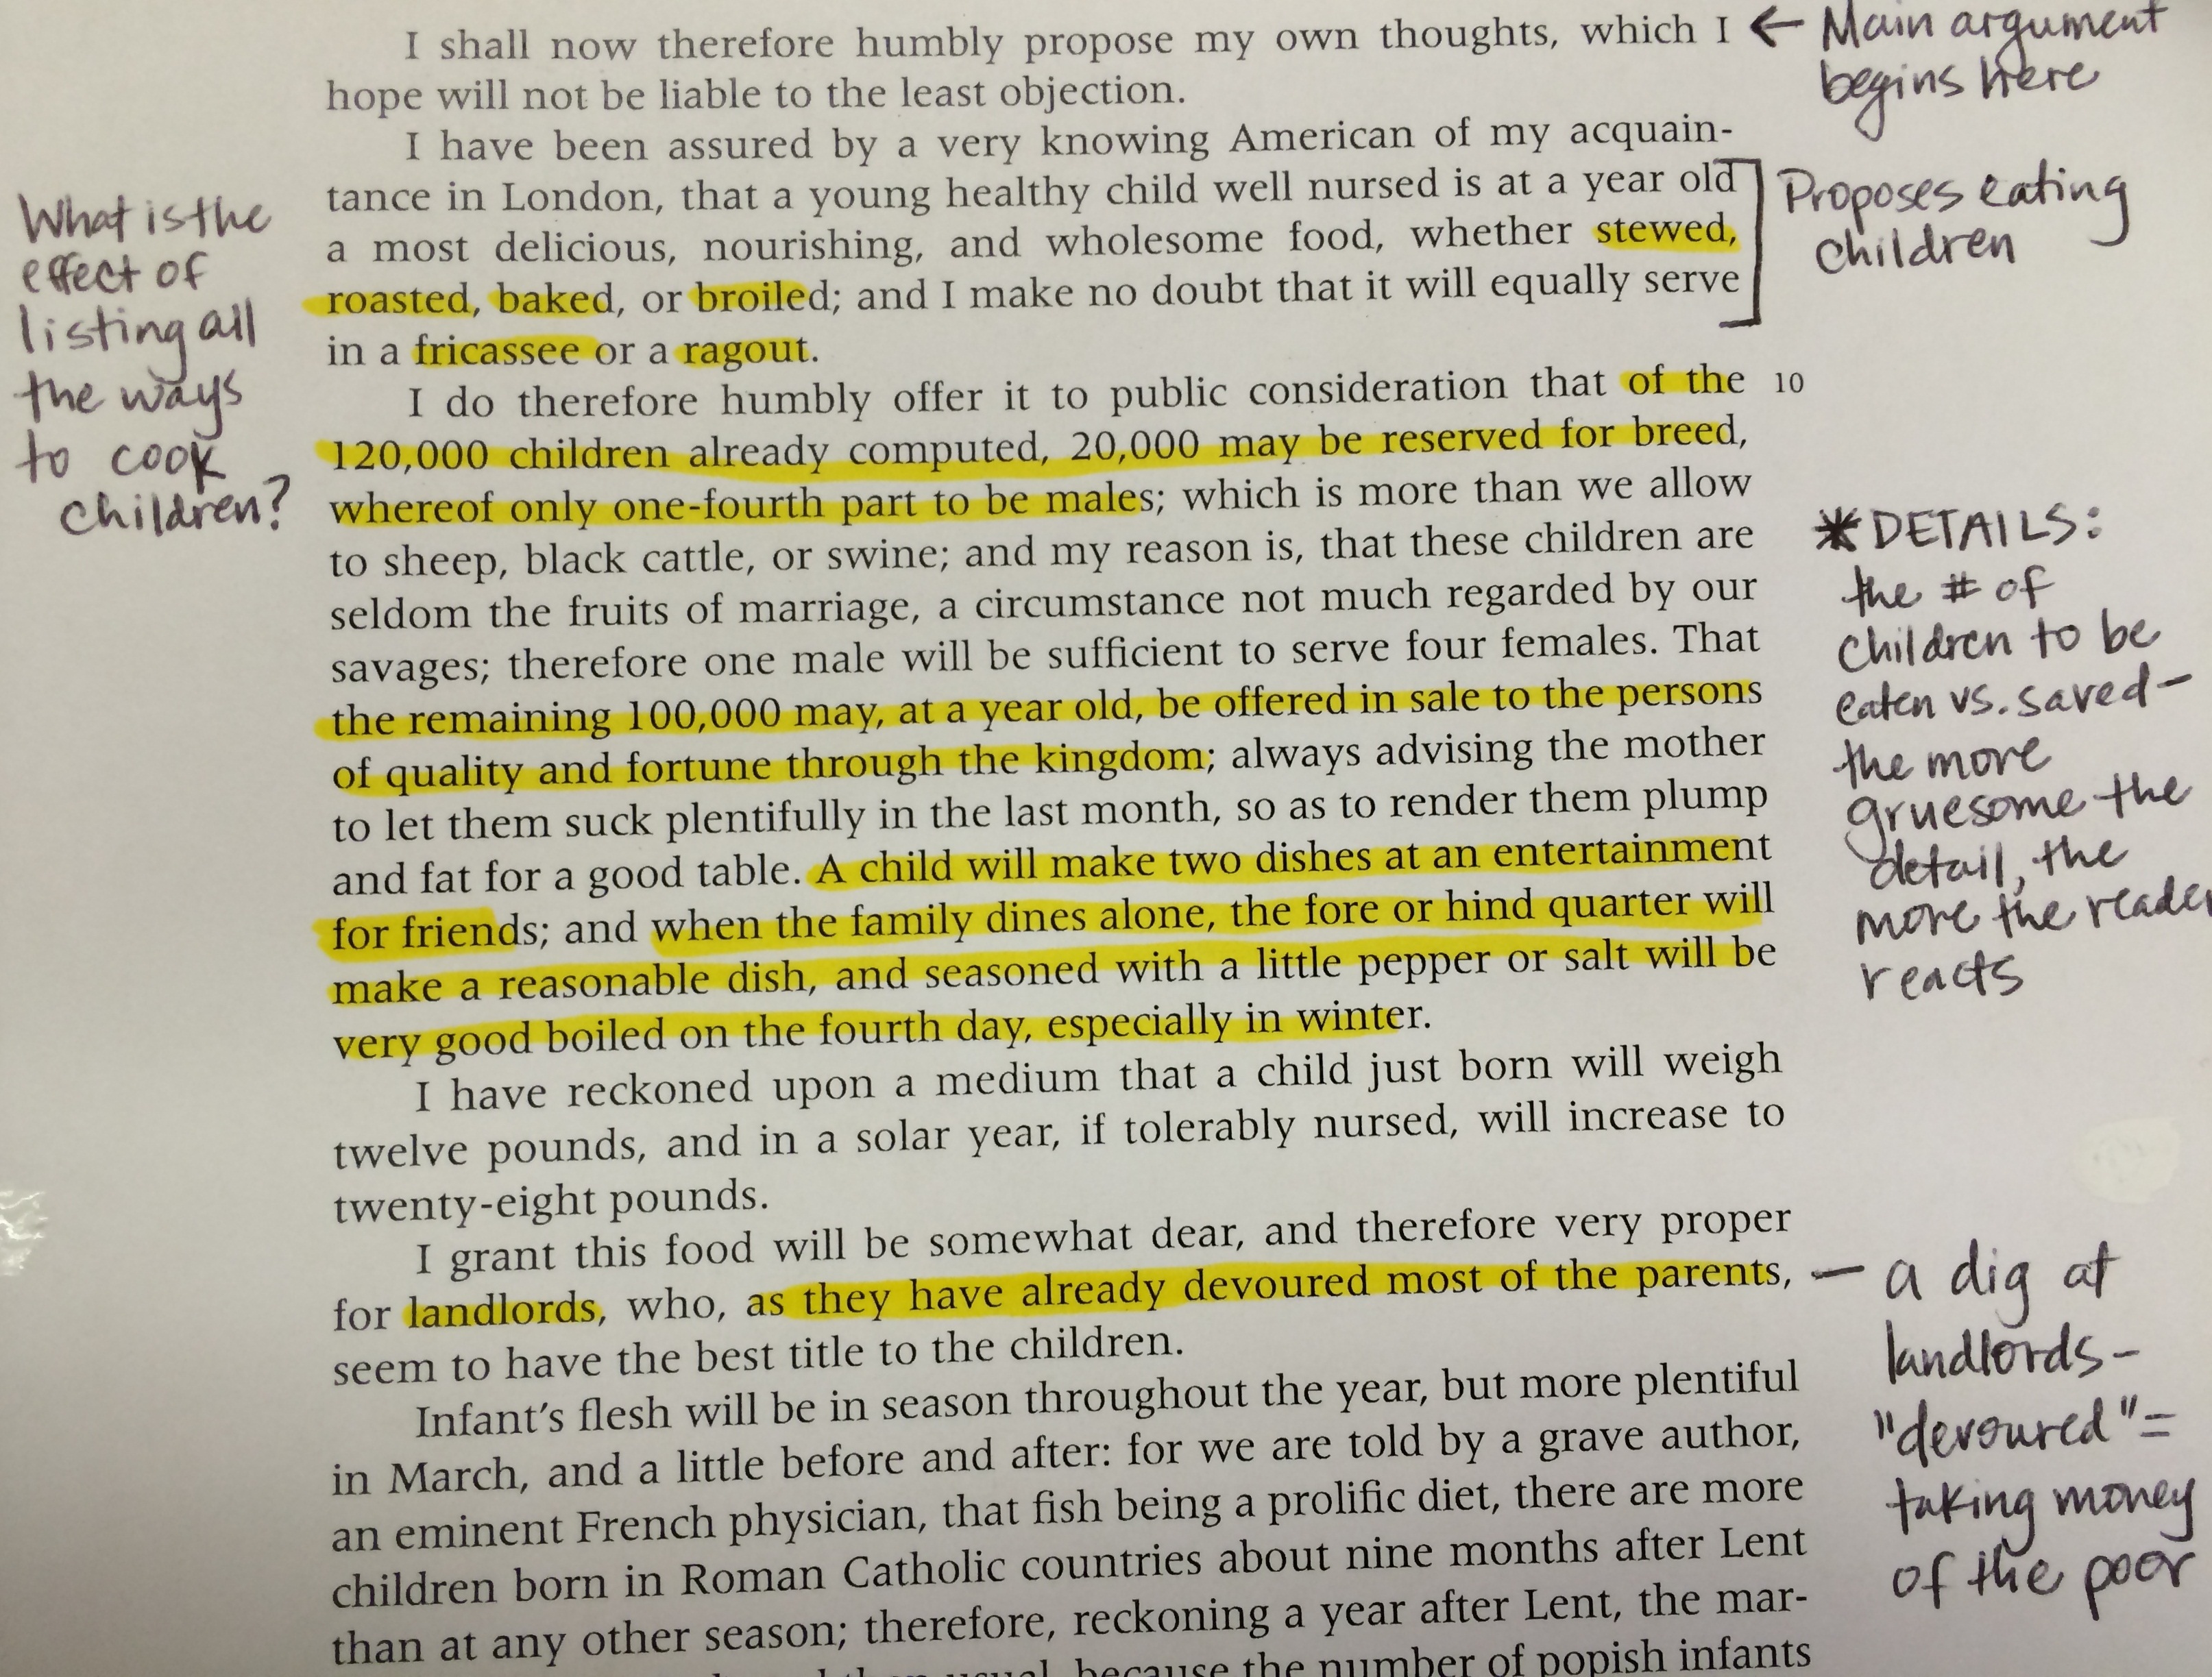 Essay with highlighted text and notes in the margins